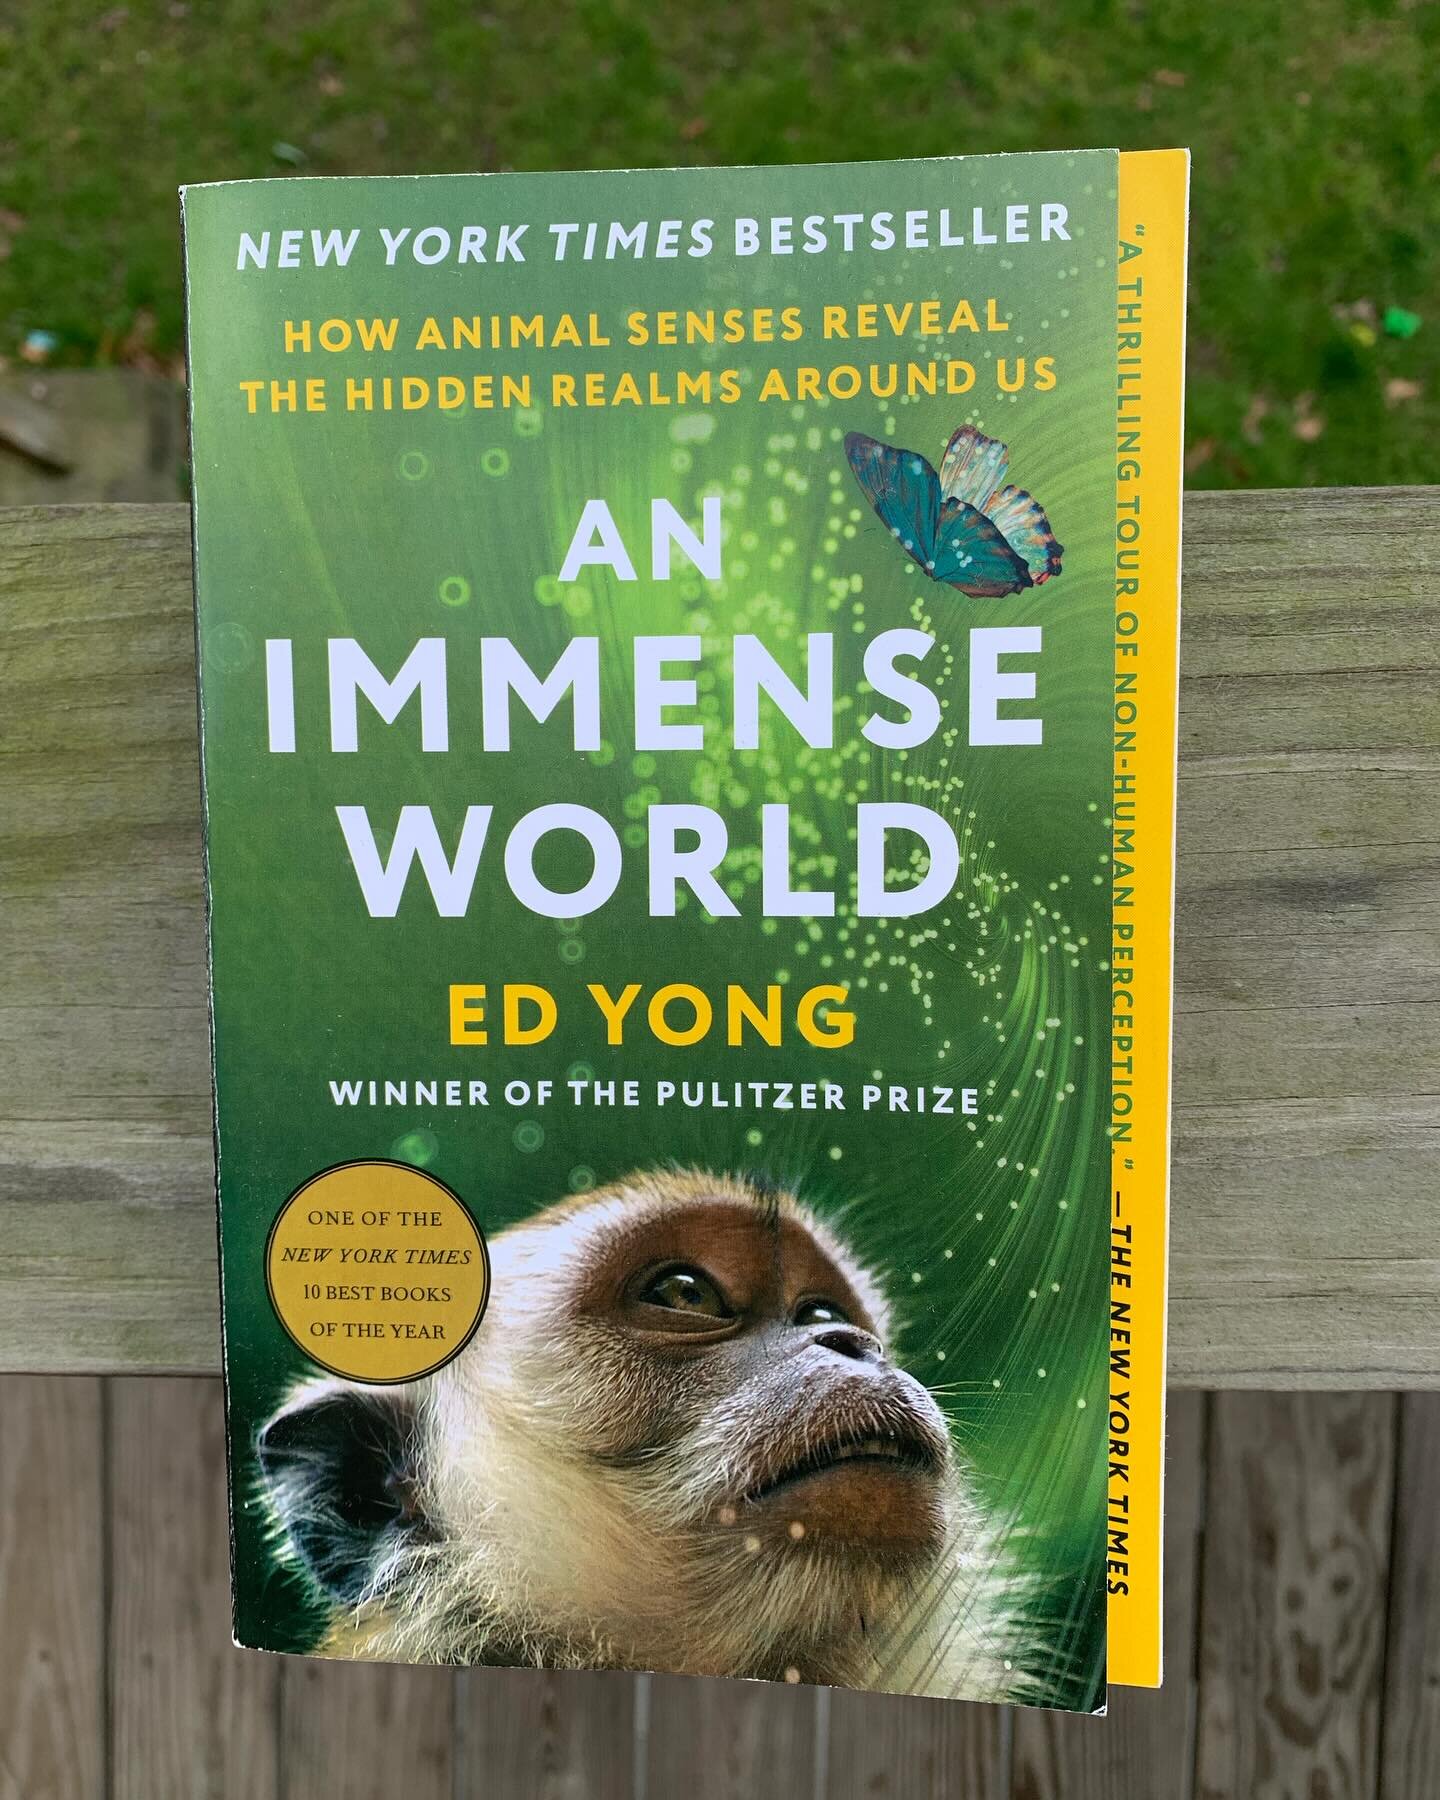 15th book of this year goes hand-in-hand with my childhood (and, let&rsquo;s be real: current) obsession with nature documentaries. I learned a ton about animal&rsquo;s Umwelt&rsquo;s and can&rsquo;t wait to attend Ed Yong&rsquo;s reading later this 